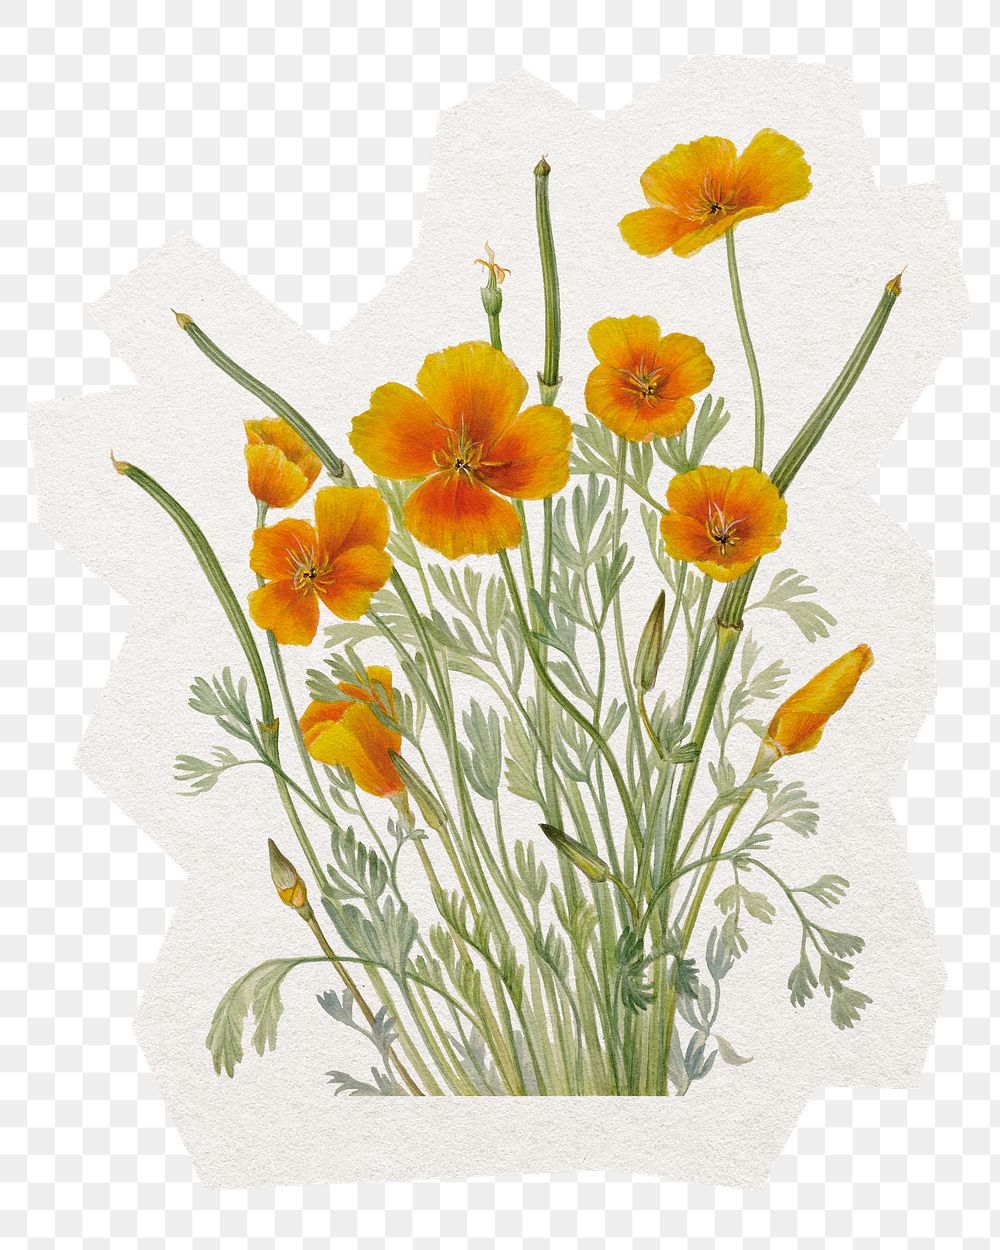 Flower sticker png, Mexican poppy illustration in transparent background